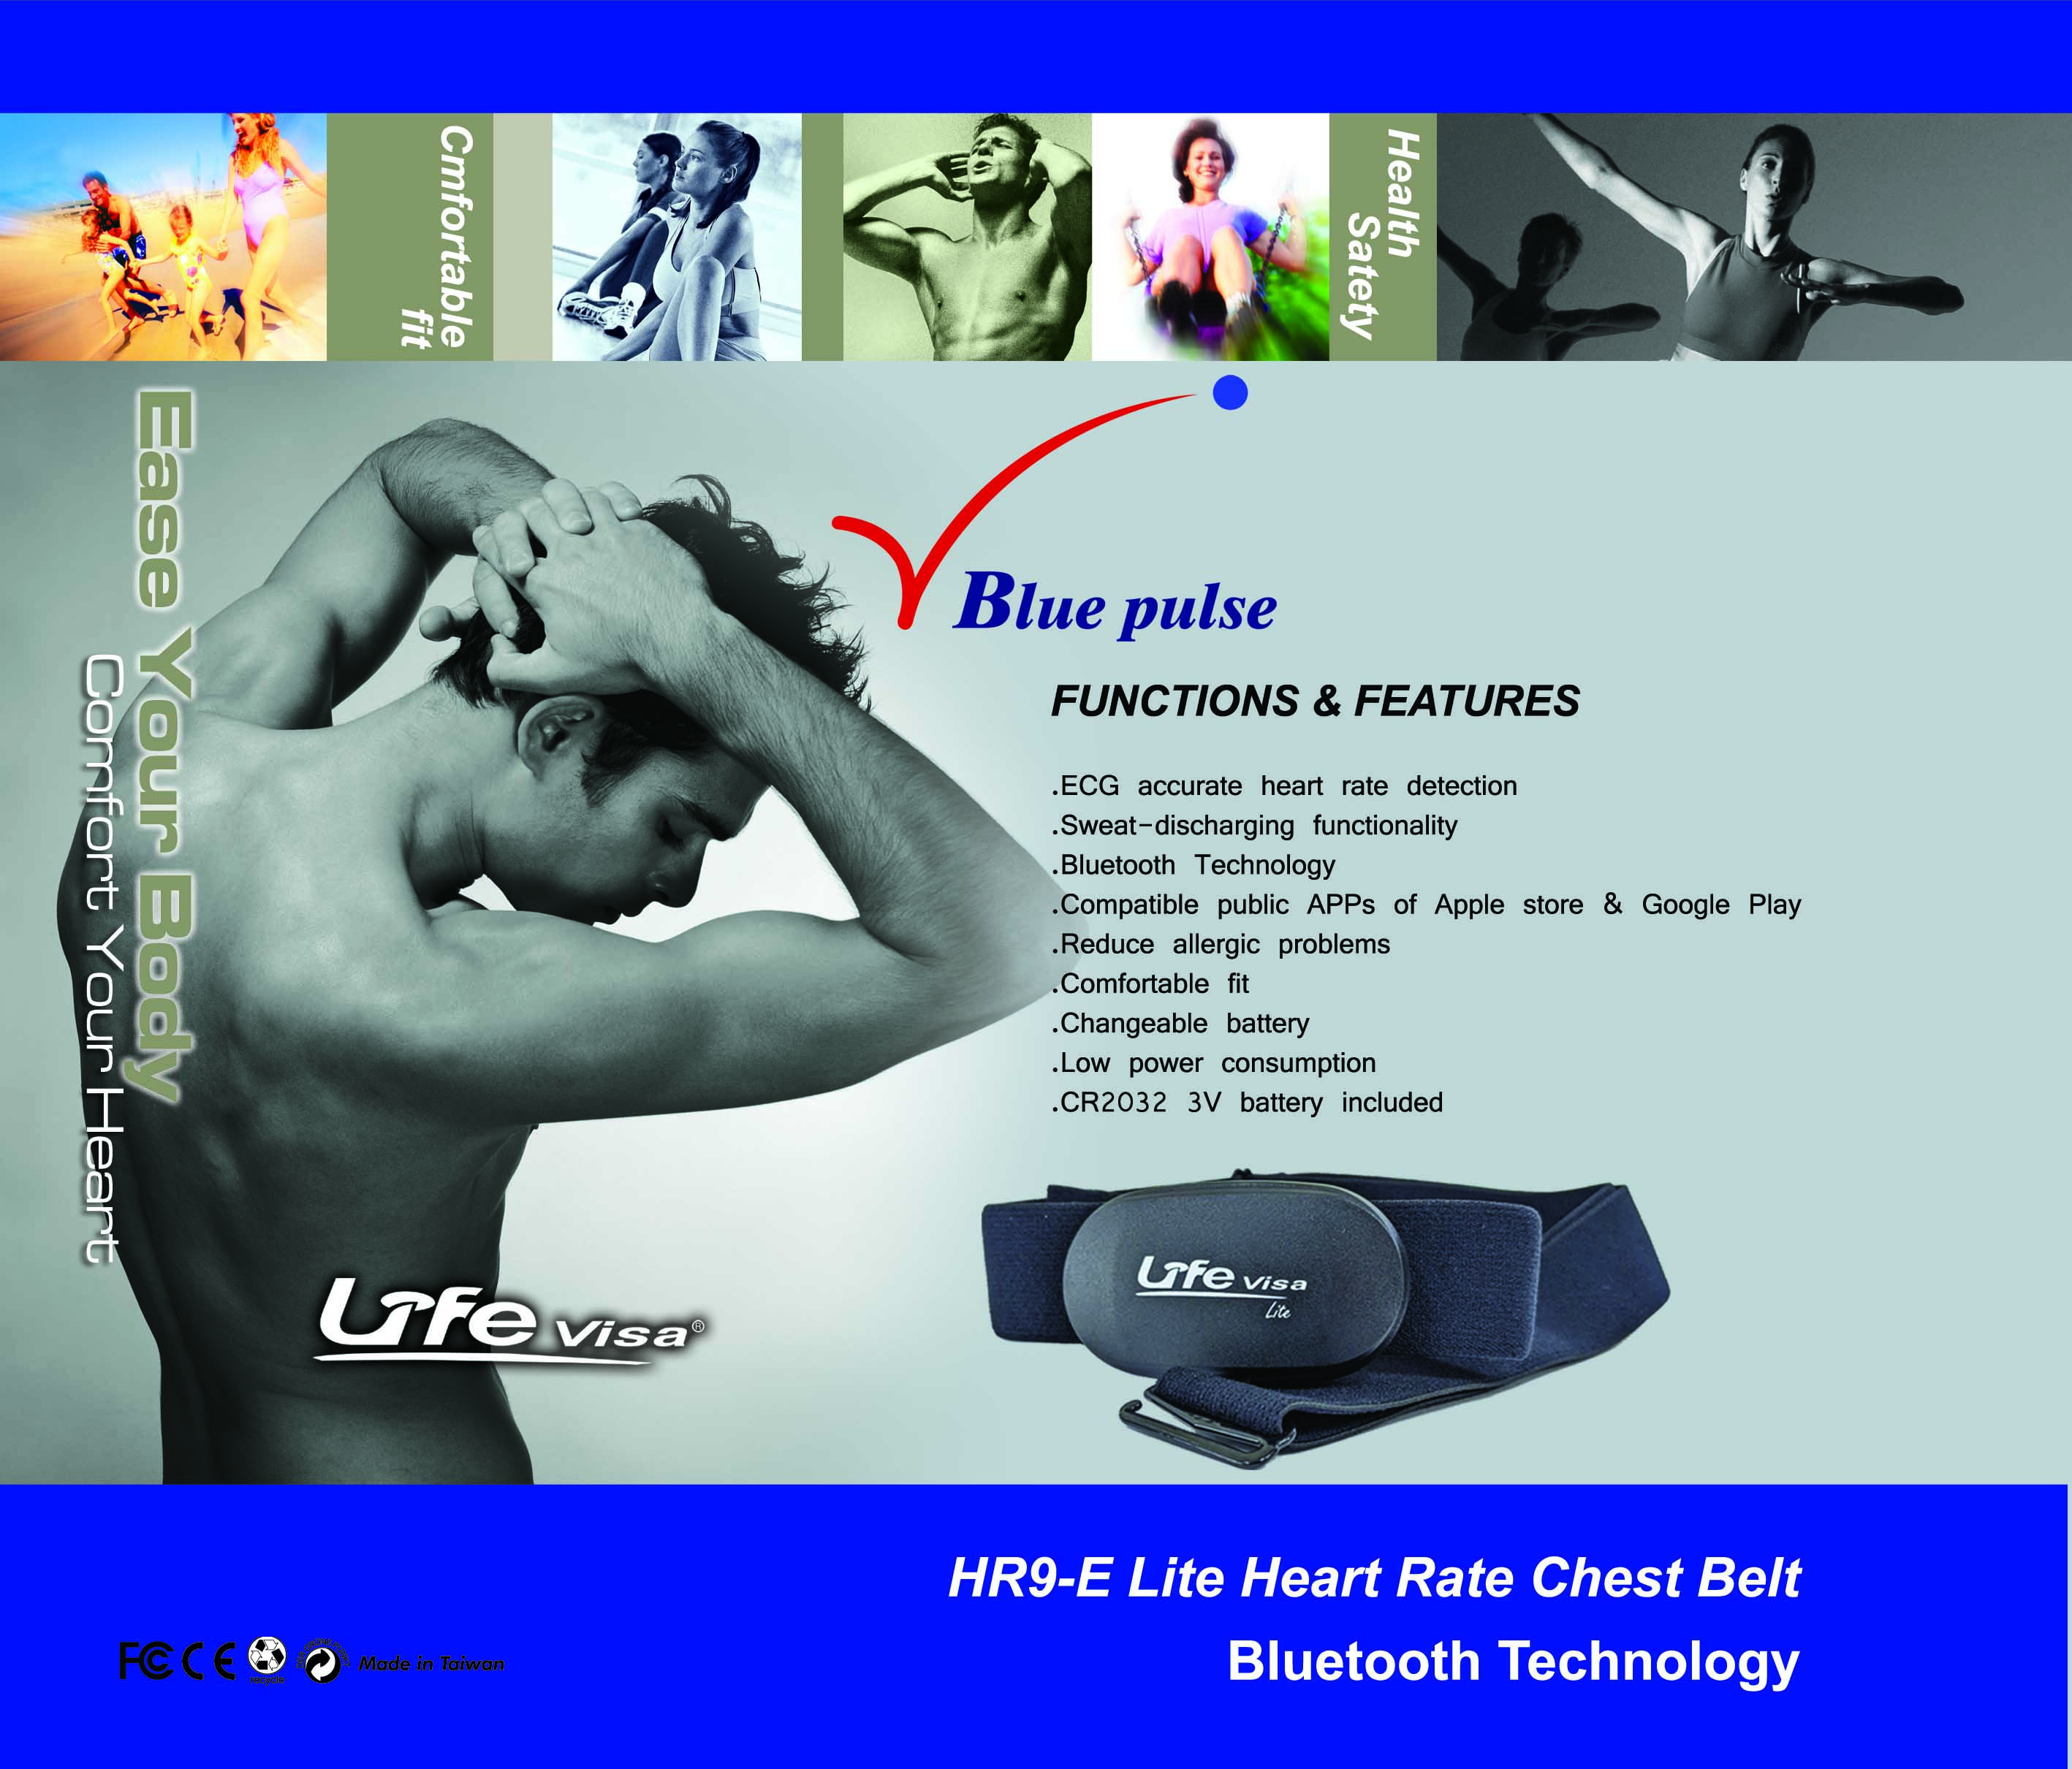 Bluetooth heart rate monitor,Biotronic pulse heart rate monitor,Bluetooth heart rate monitor,One-piece elastic heart rate chest strap,gpulse heart rate monitor,G.PULSE 3 in 1,3 in 1 heart rate,three mode heart rate monitor,Lifevisa,lifevisa,Taiwan Biotronic